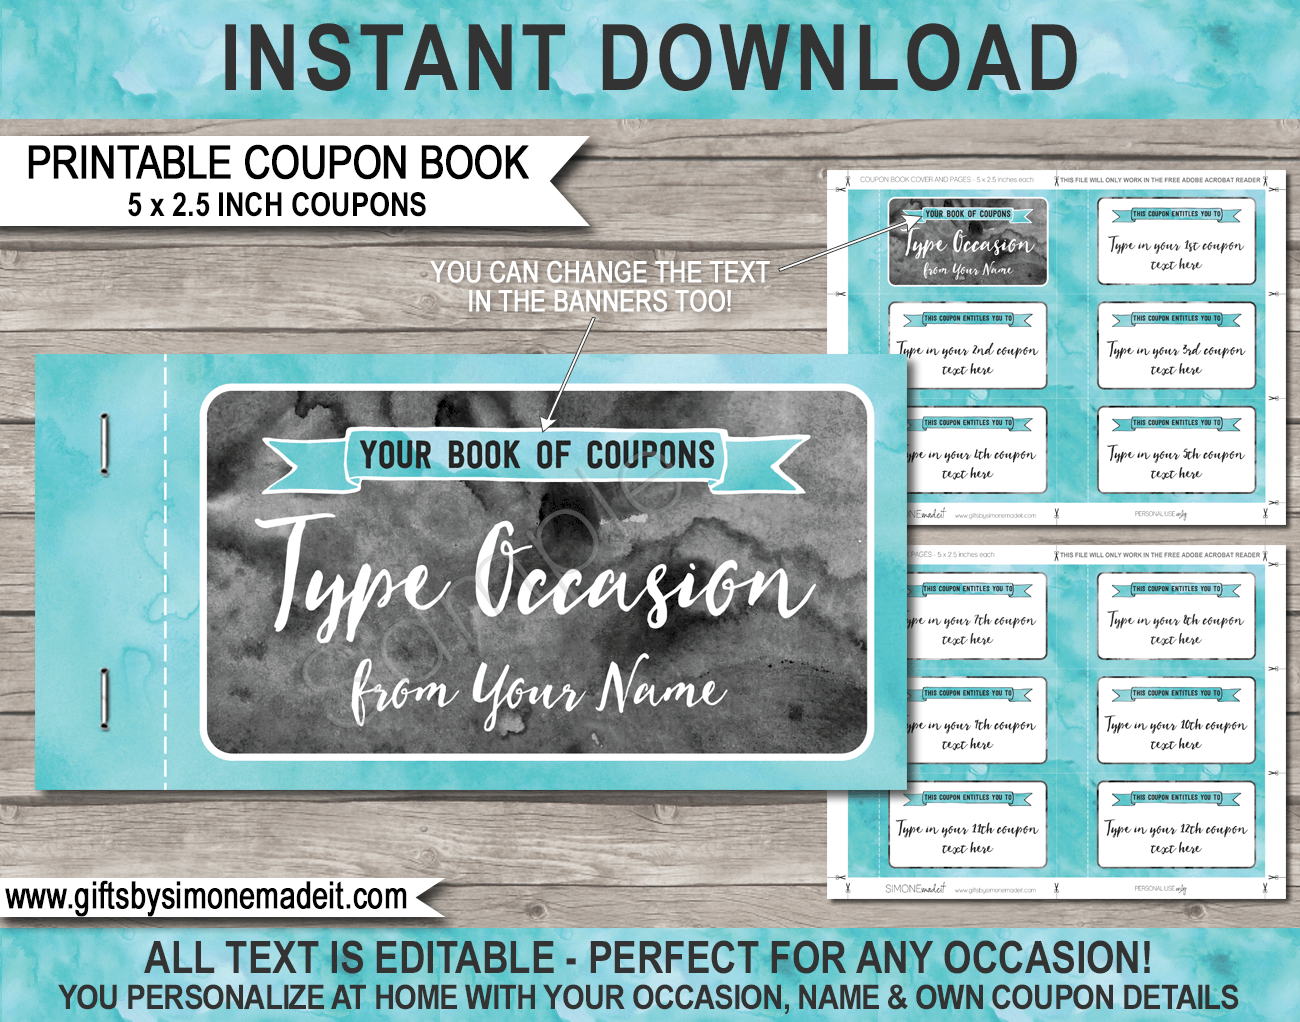 Printable Coupon Template For A Gift from www.giftsbysimonemadeit.com